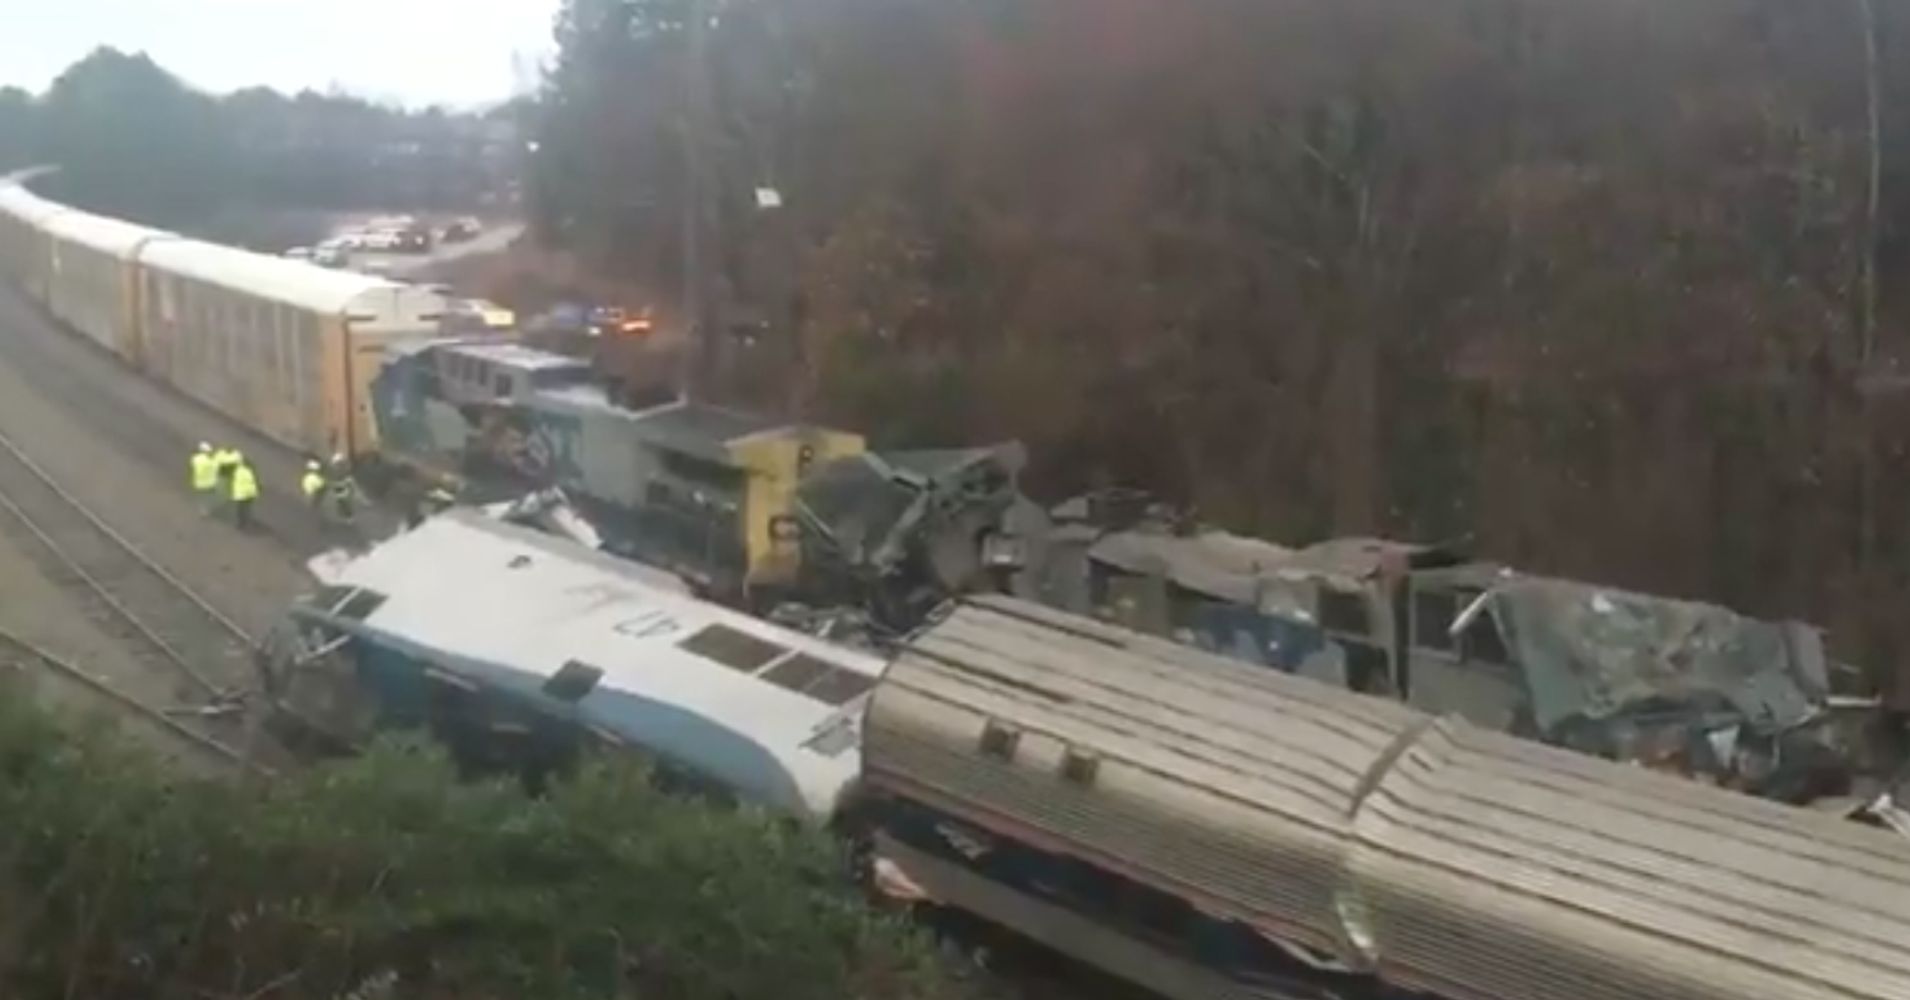 Amtrak Train Derails After Collision In South Carolina; At Least 2 Dead